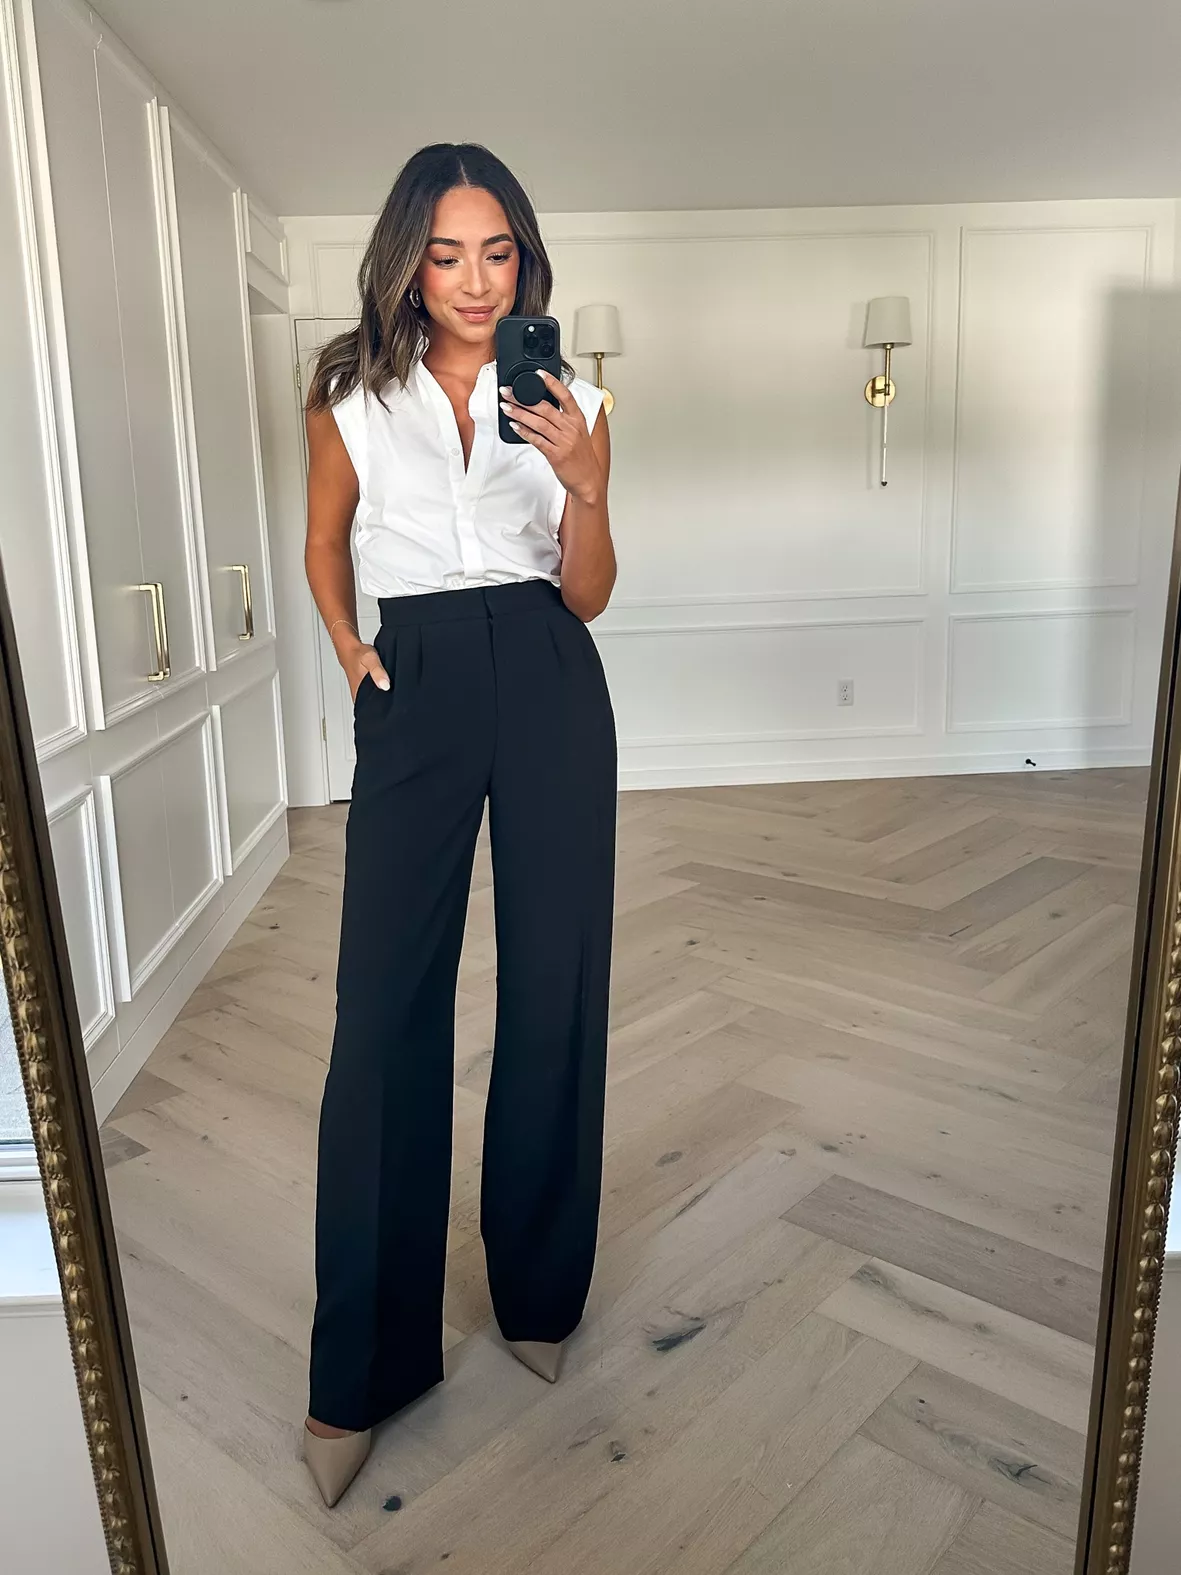 Strictly Business Black High Waisted Trouser Pants  Business casual outfits  for work, Stylish work outfits, Business outfits women